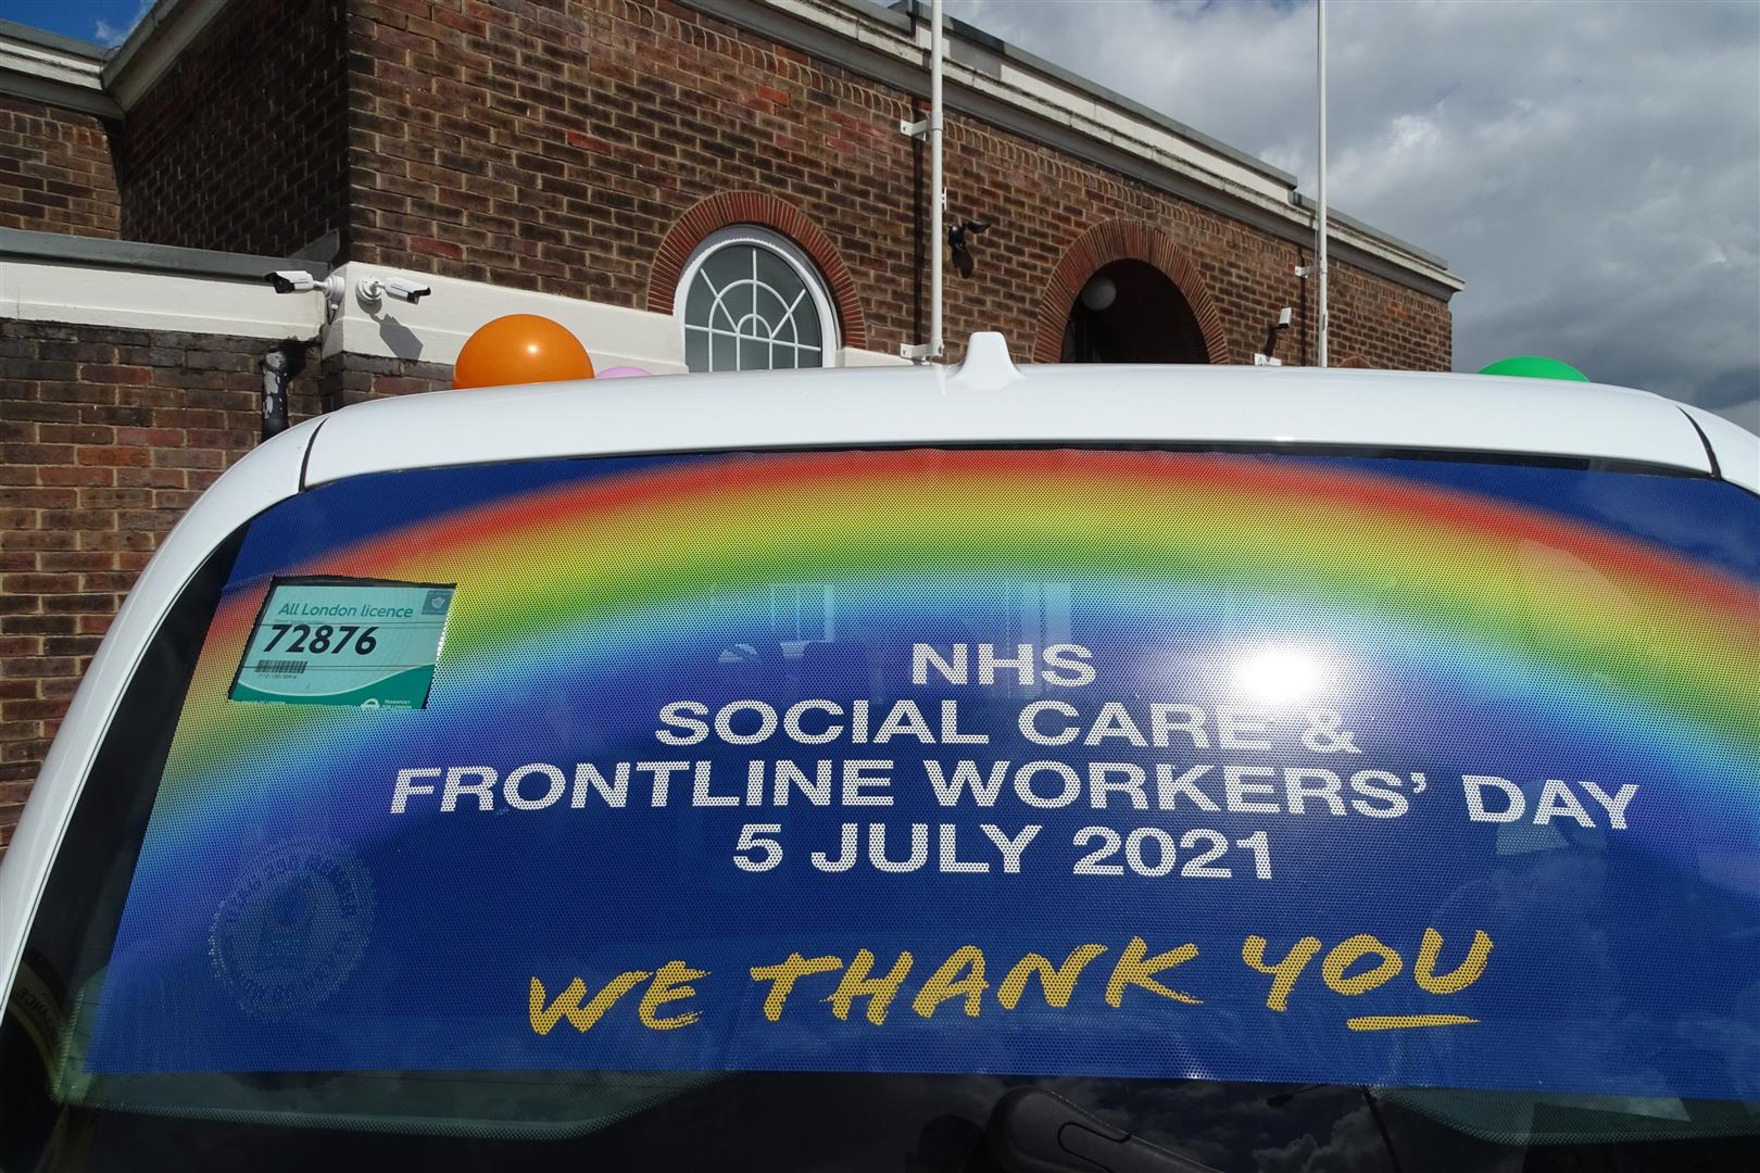 NHS Social Care and Frontline Workers Day observed at Chingford Masonic Hall London E4